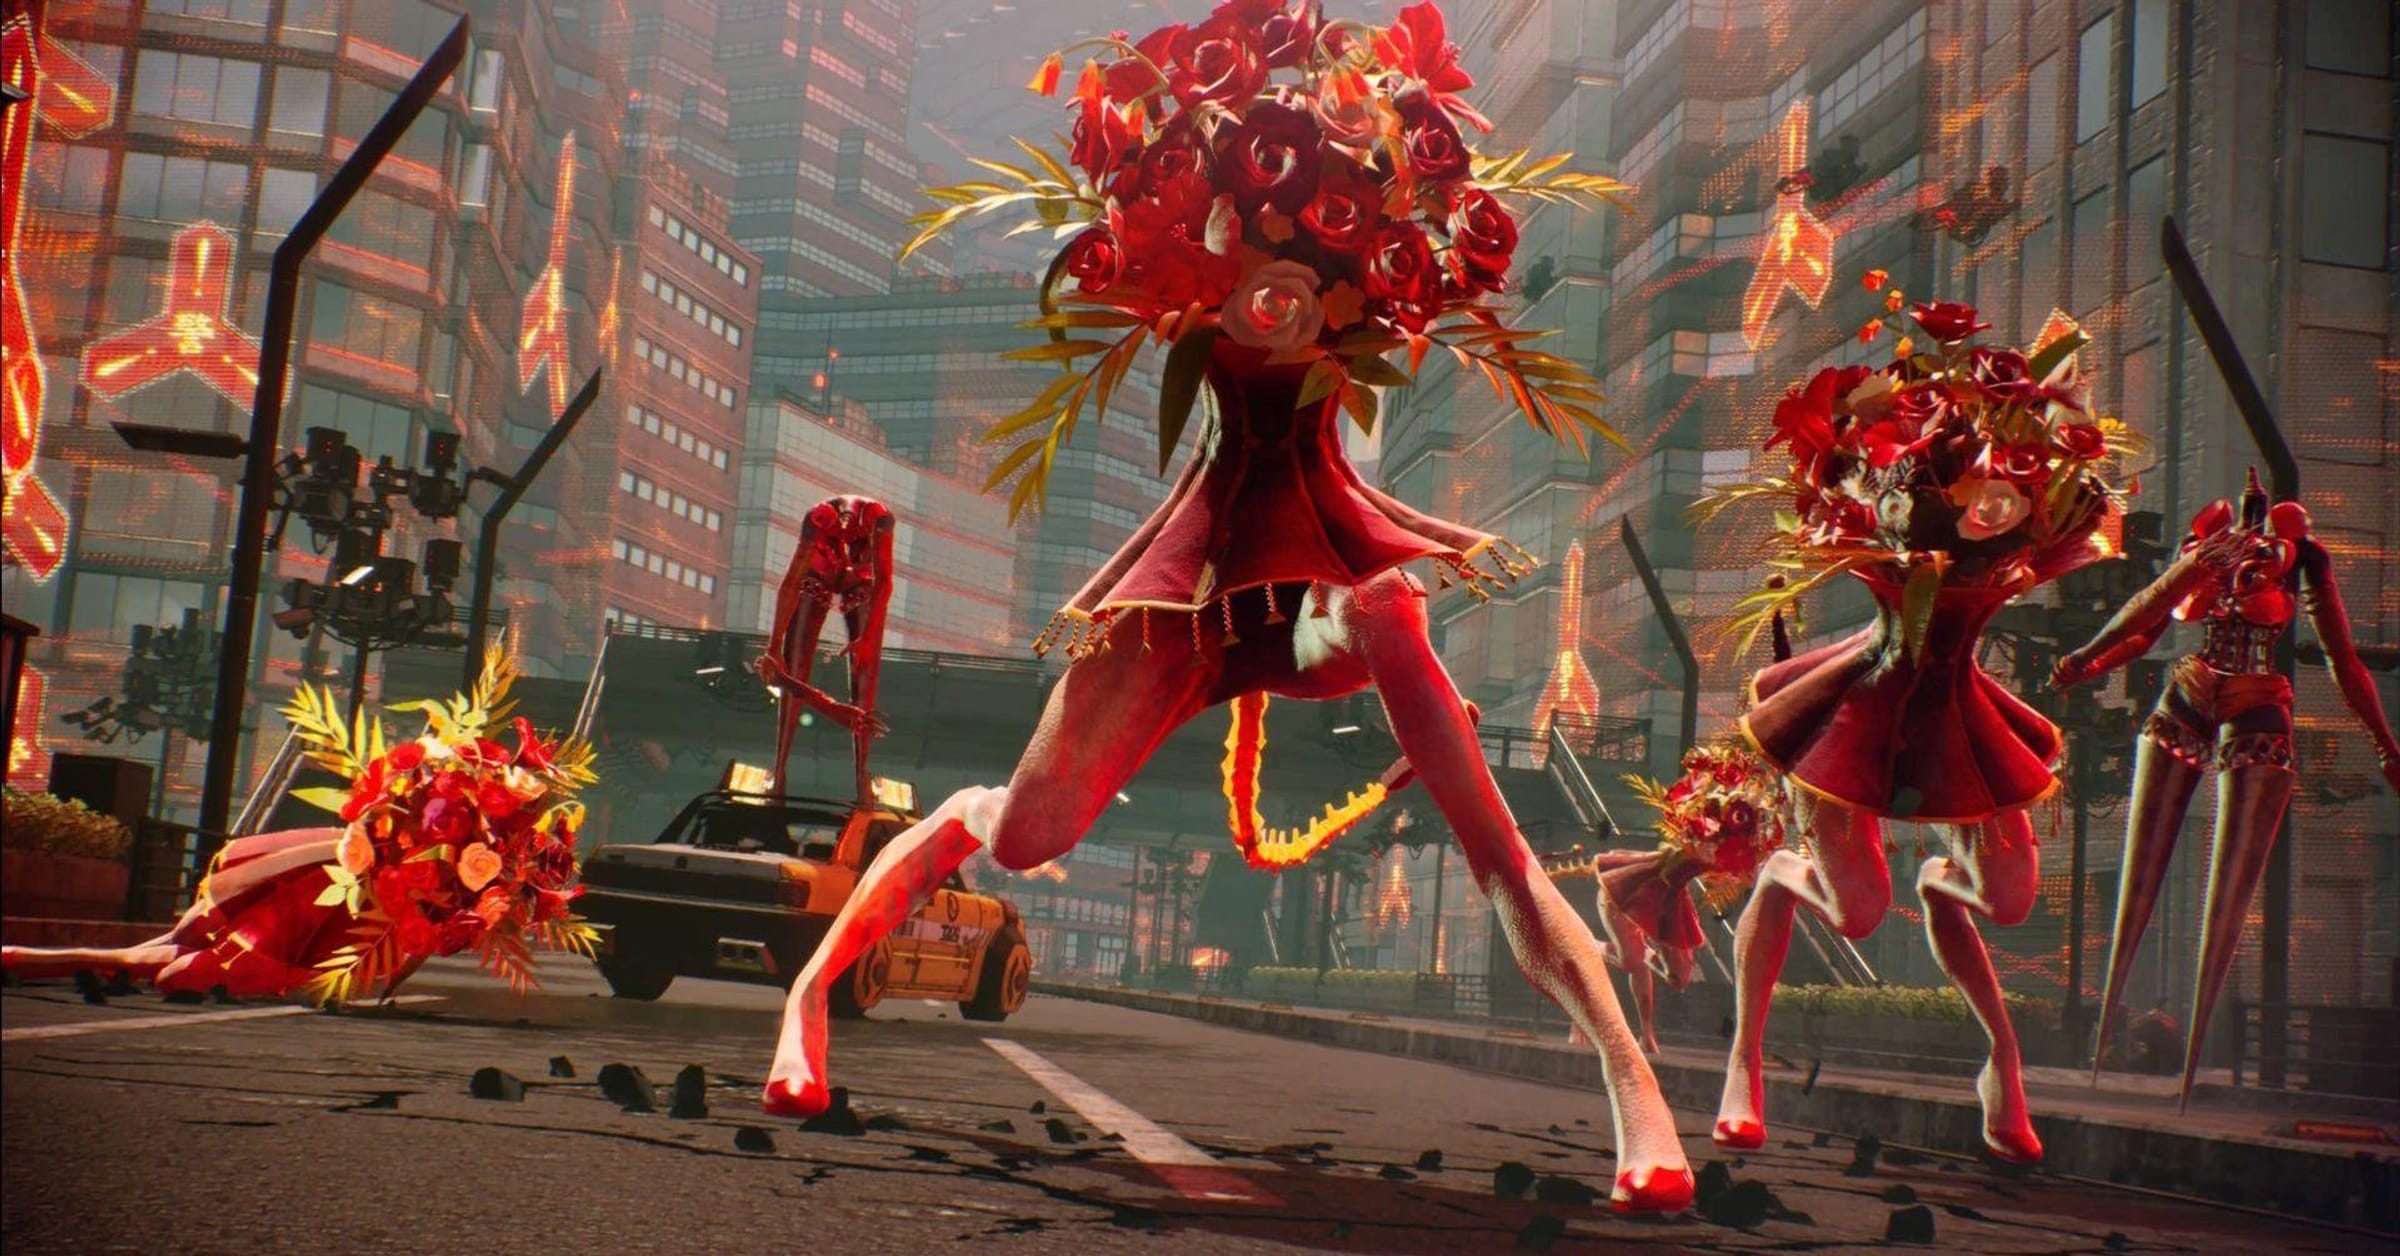 Hands-On: Scarlet Nexus is shaping up to be a solid anime action game